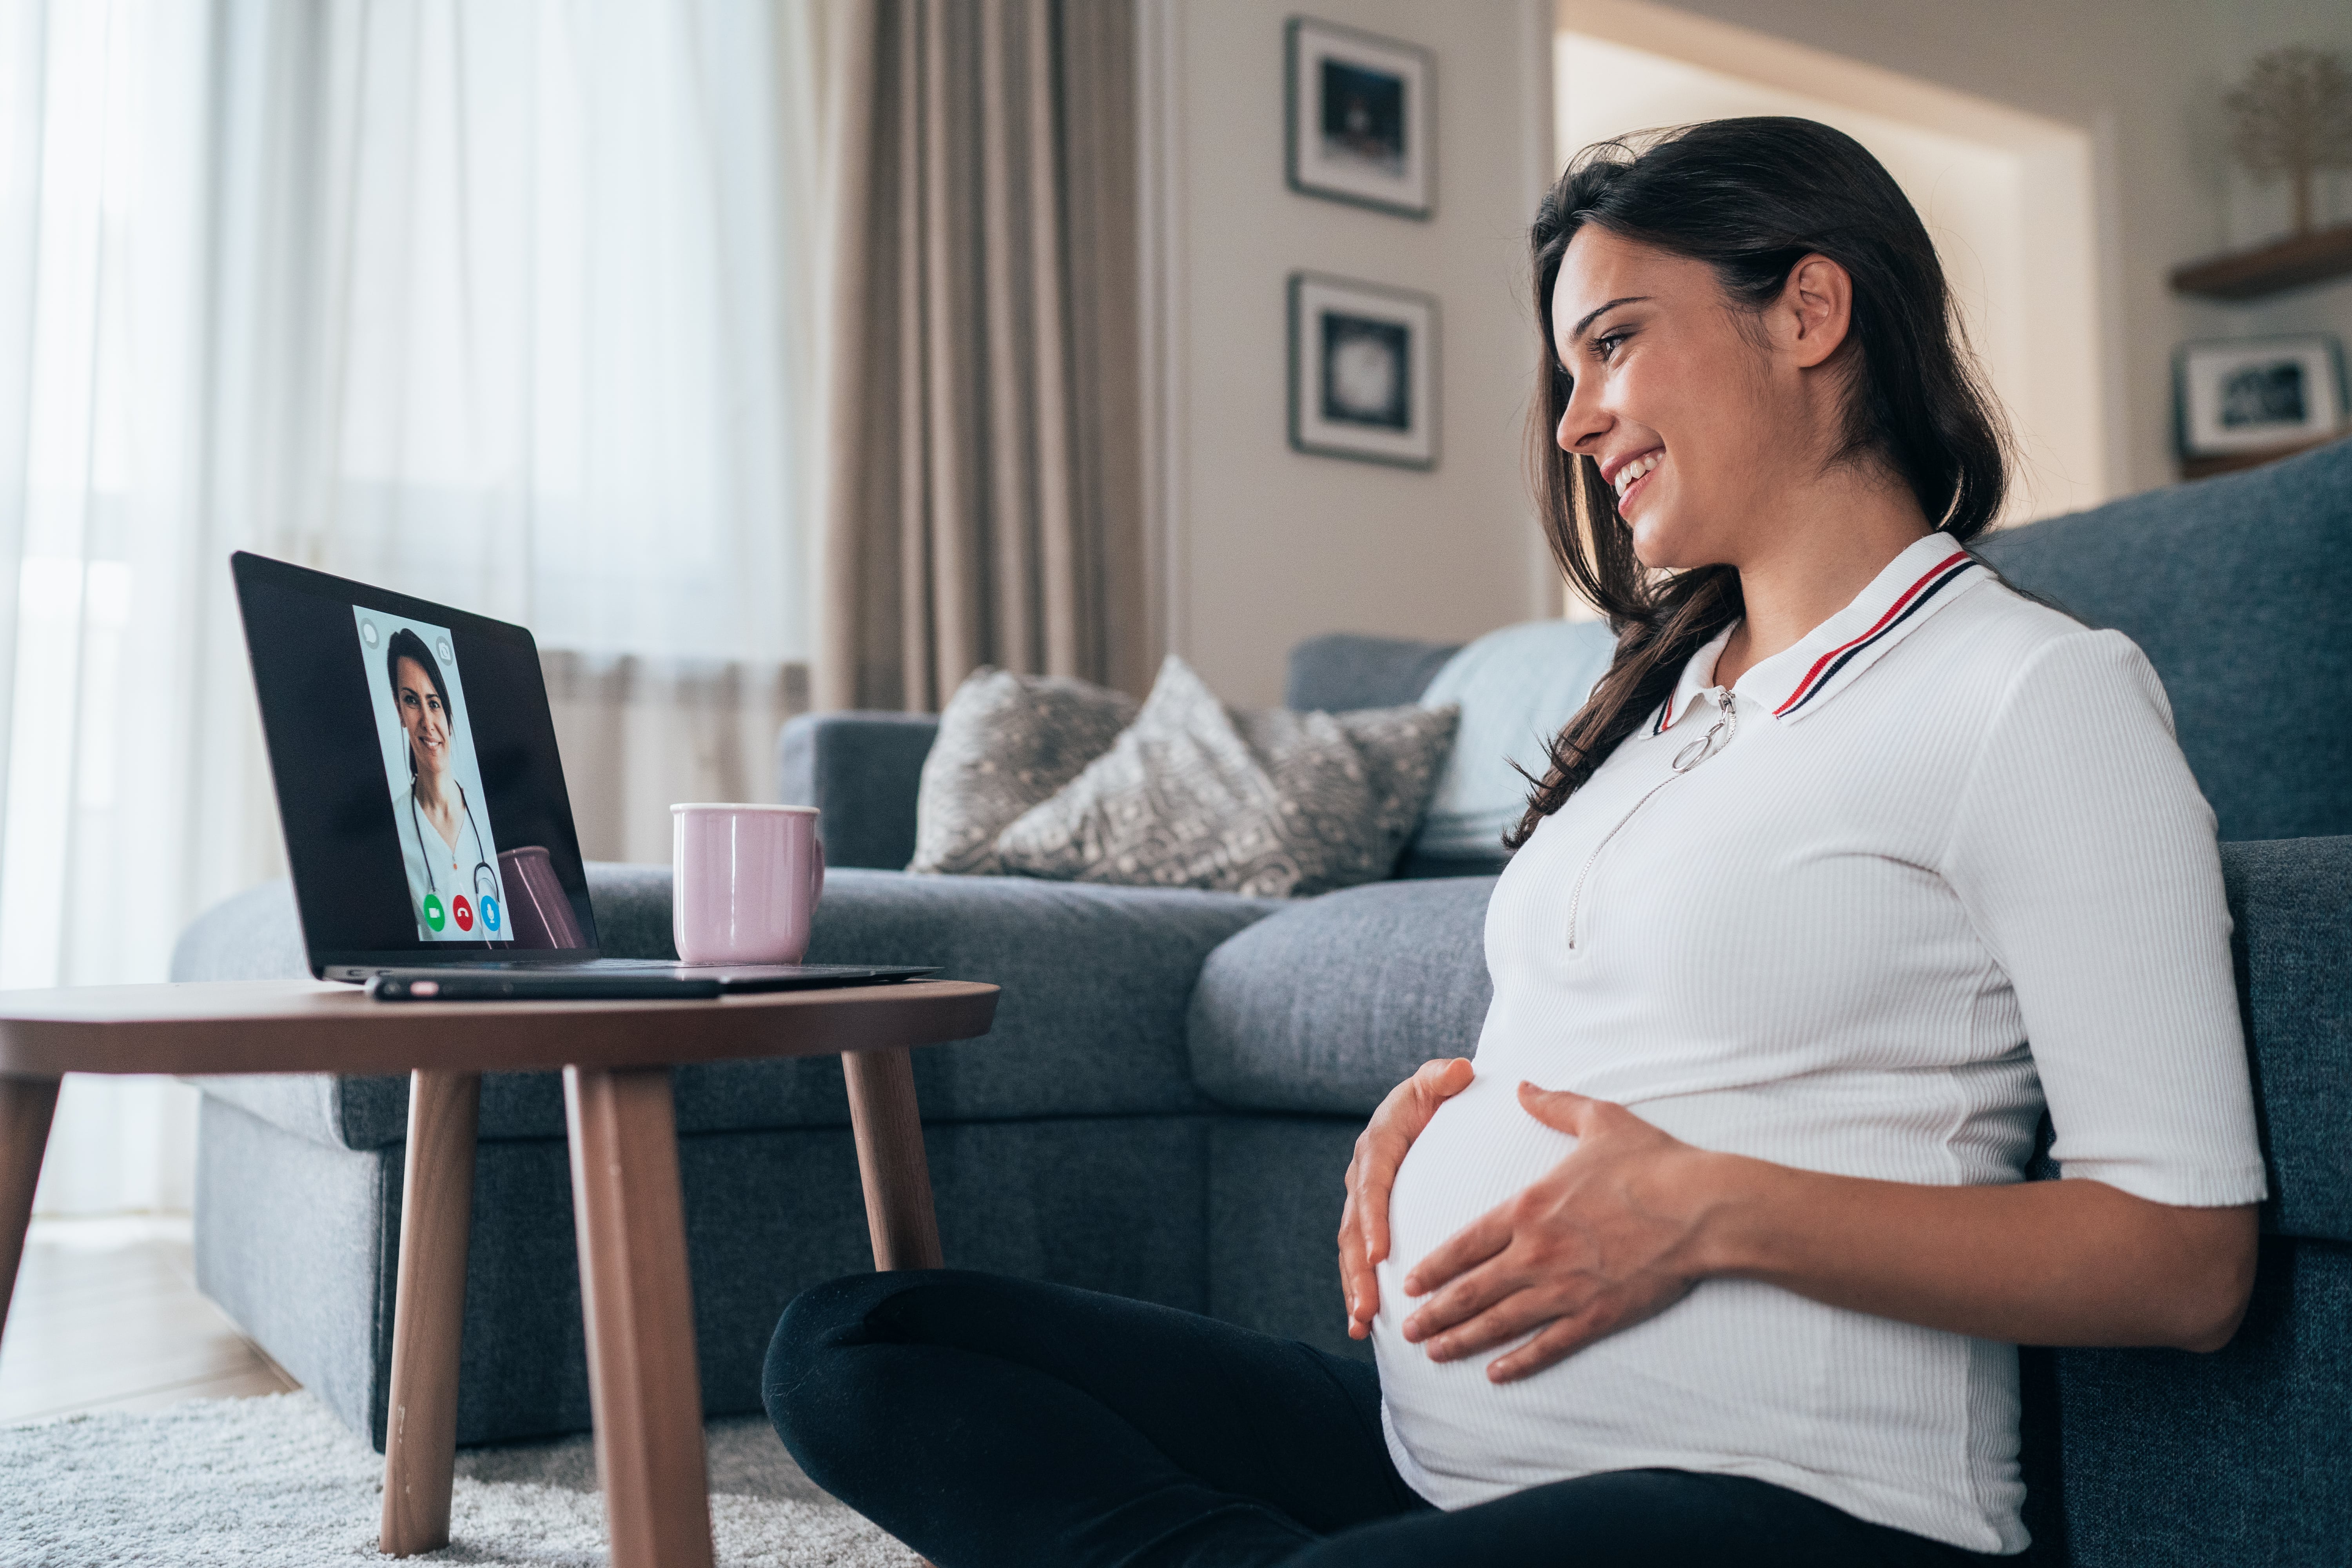 A pregnant women speaks with her doctor in a telehealth visit